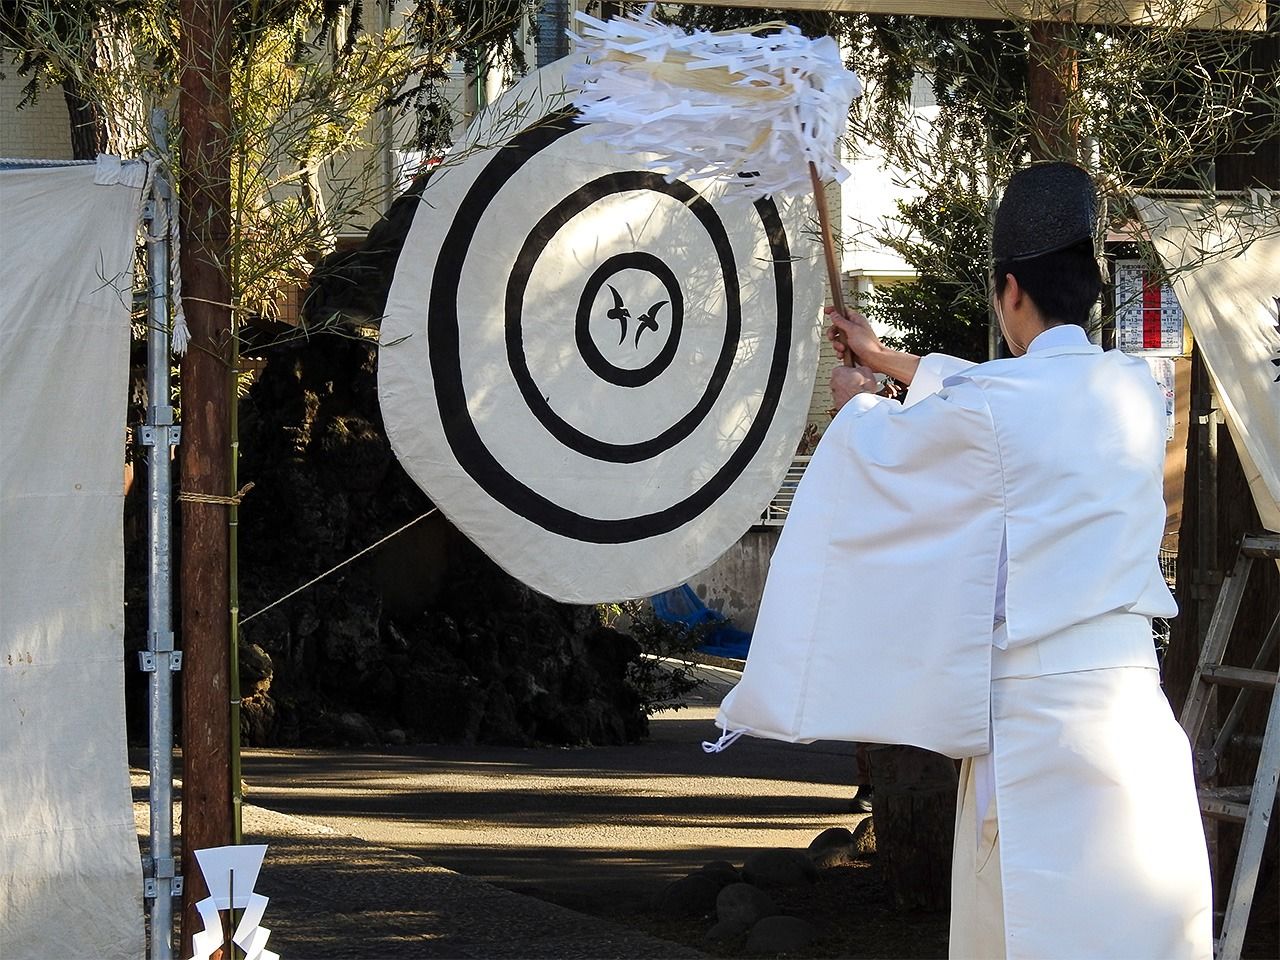  A priest prays before a target decorated with karasu.